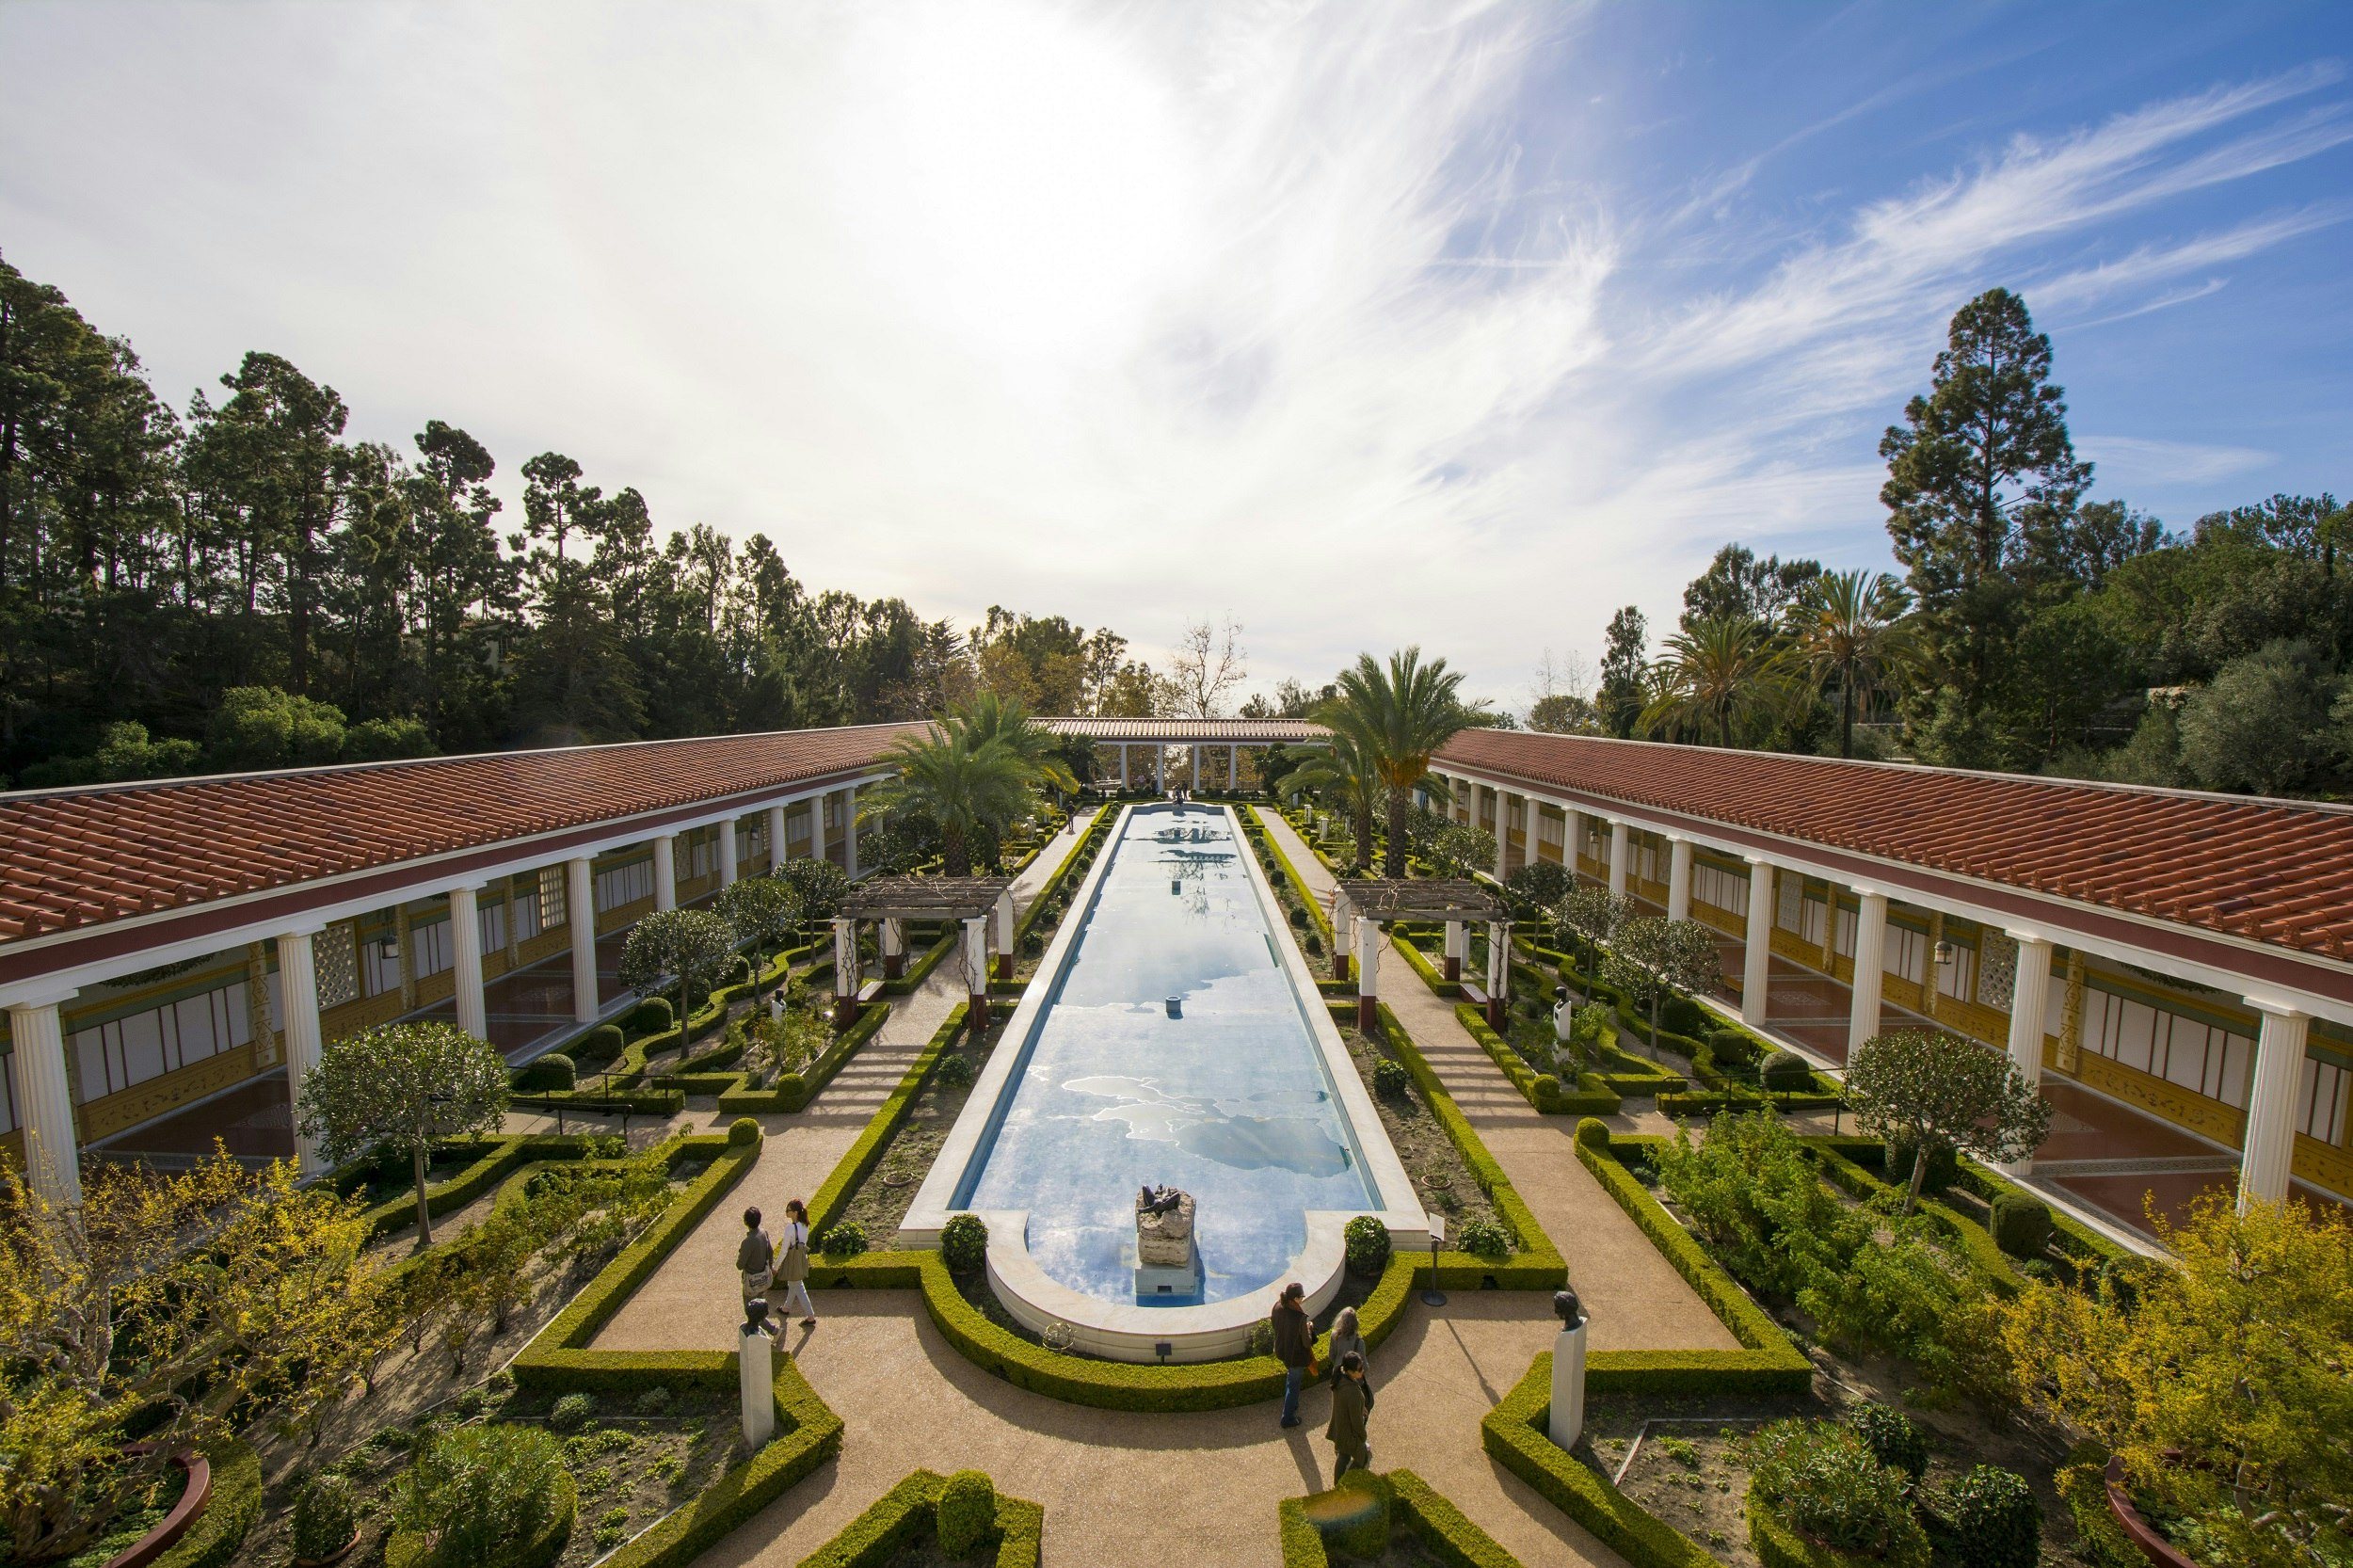 A raised, rectangular garden pond extends into the distance within a massive interior courtyard of the Getty Villa; surrounding the pond are walking paths and manicured shrubbery.